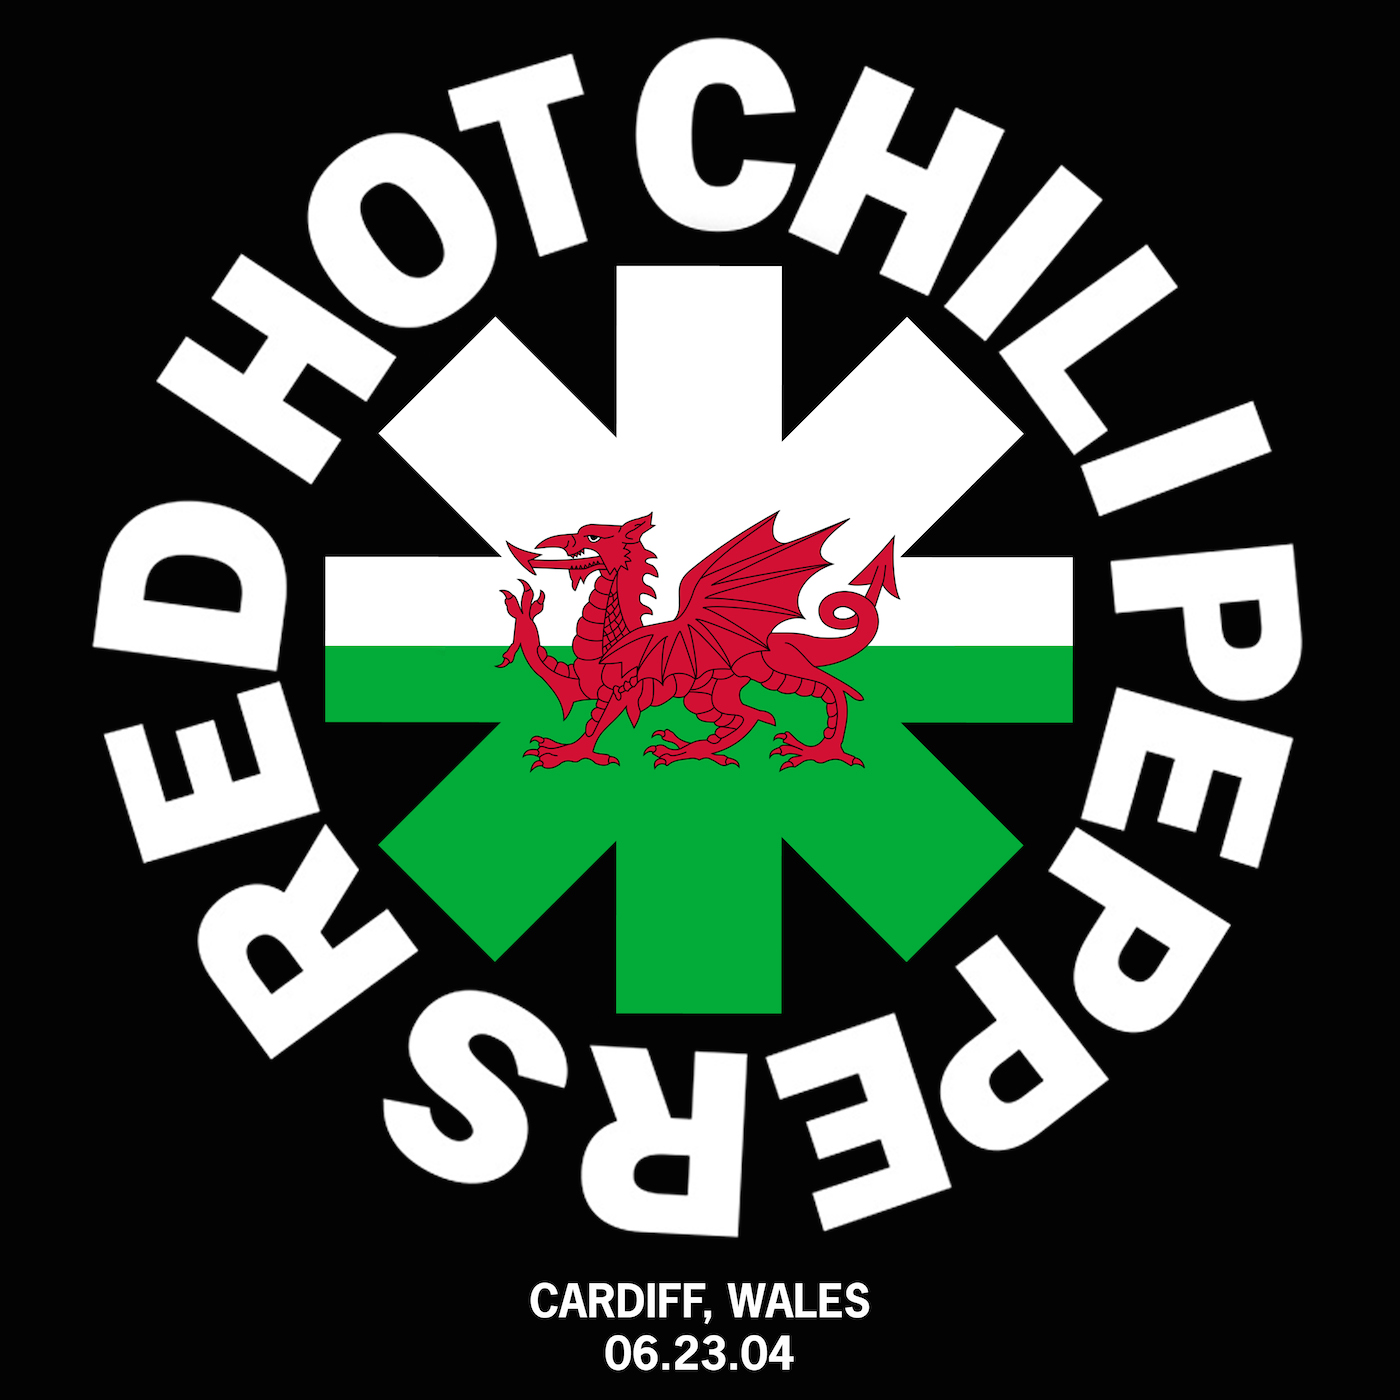 RED HOT CHILI PEPPERS - Cardiff, Wales (6/23/04) cover 